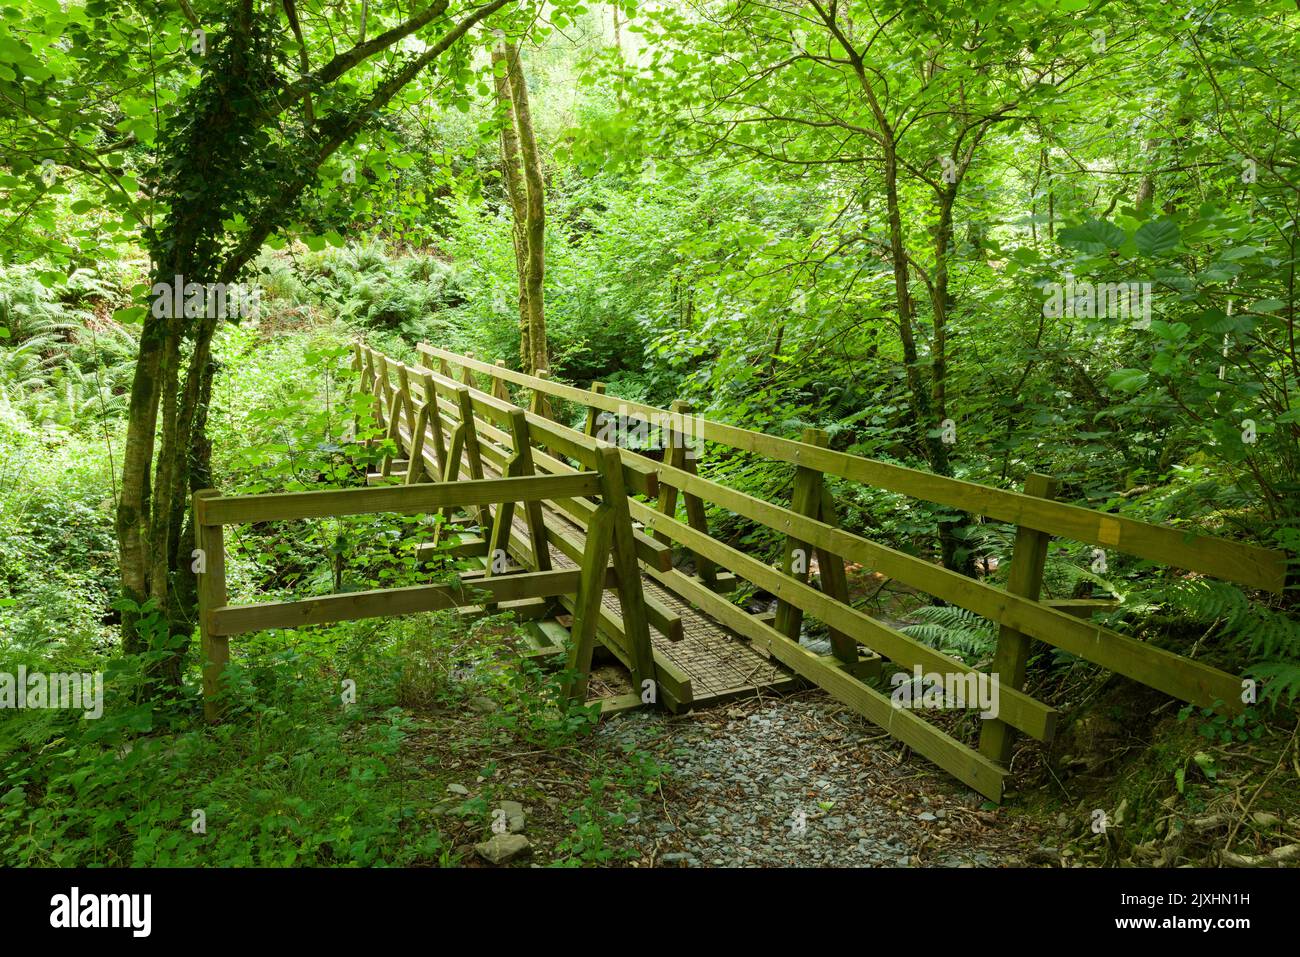 A wooden footbridge over the River Heddon in the Exmoor National Park, North Devon, England. Stock Photo